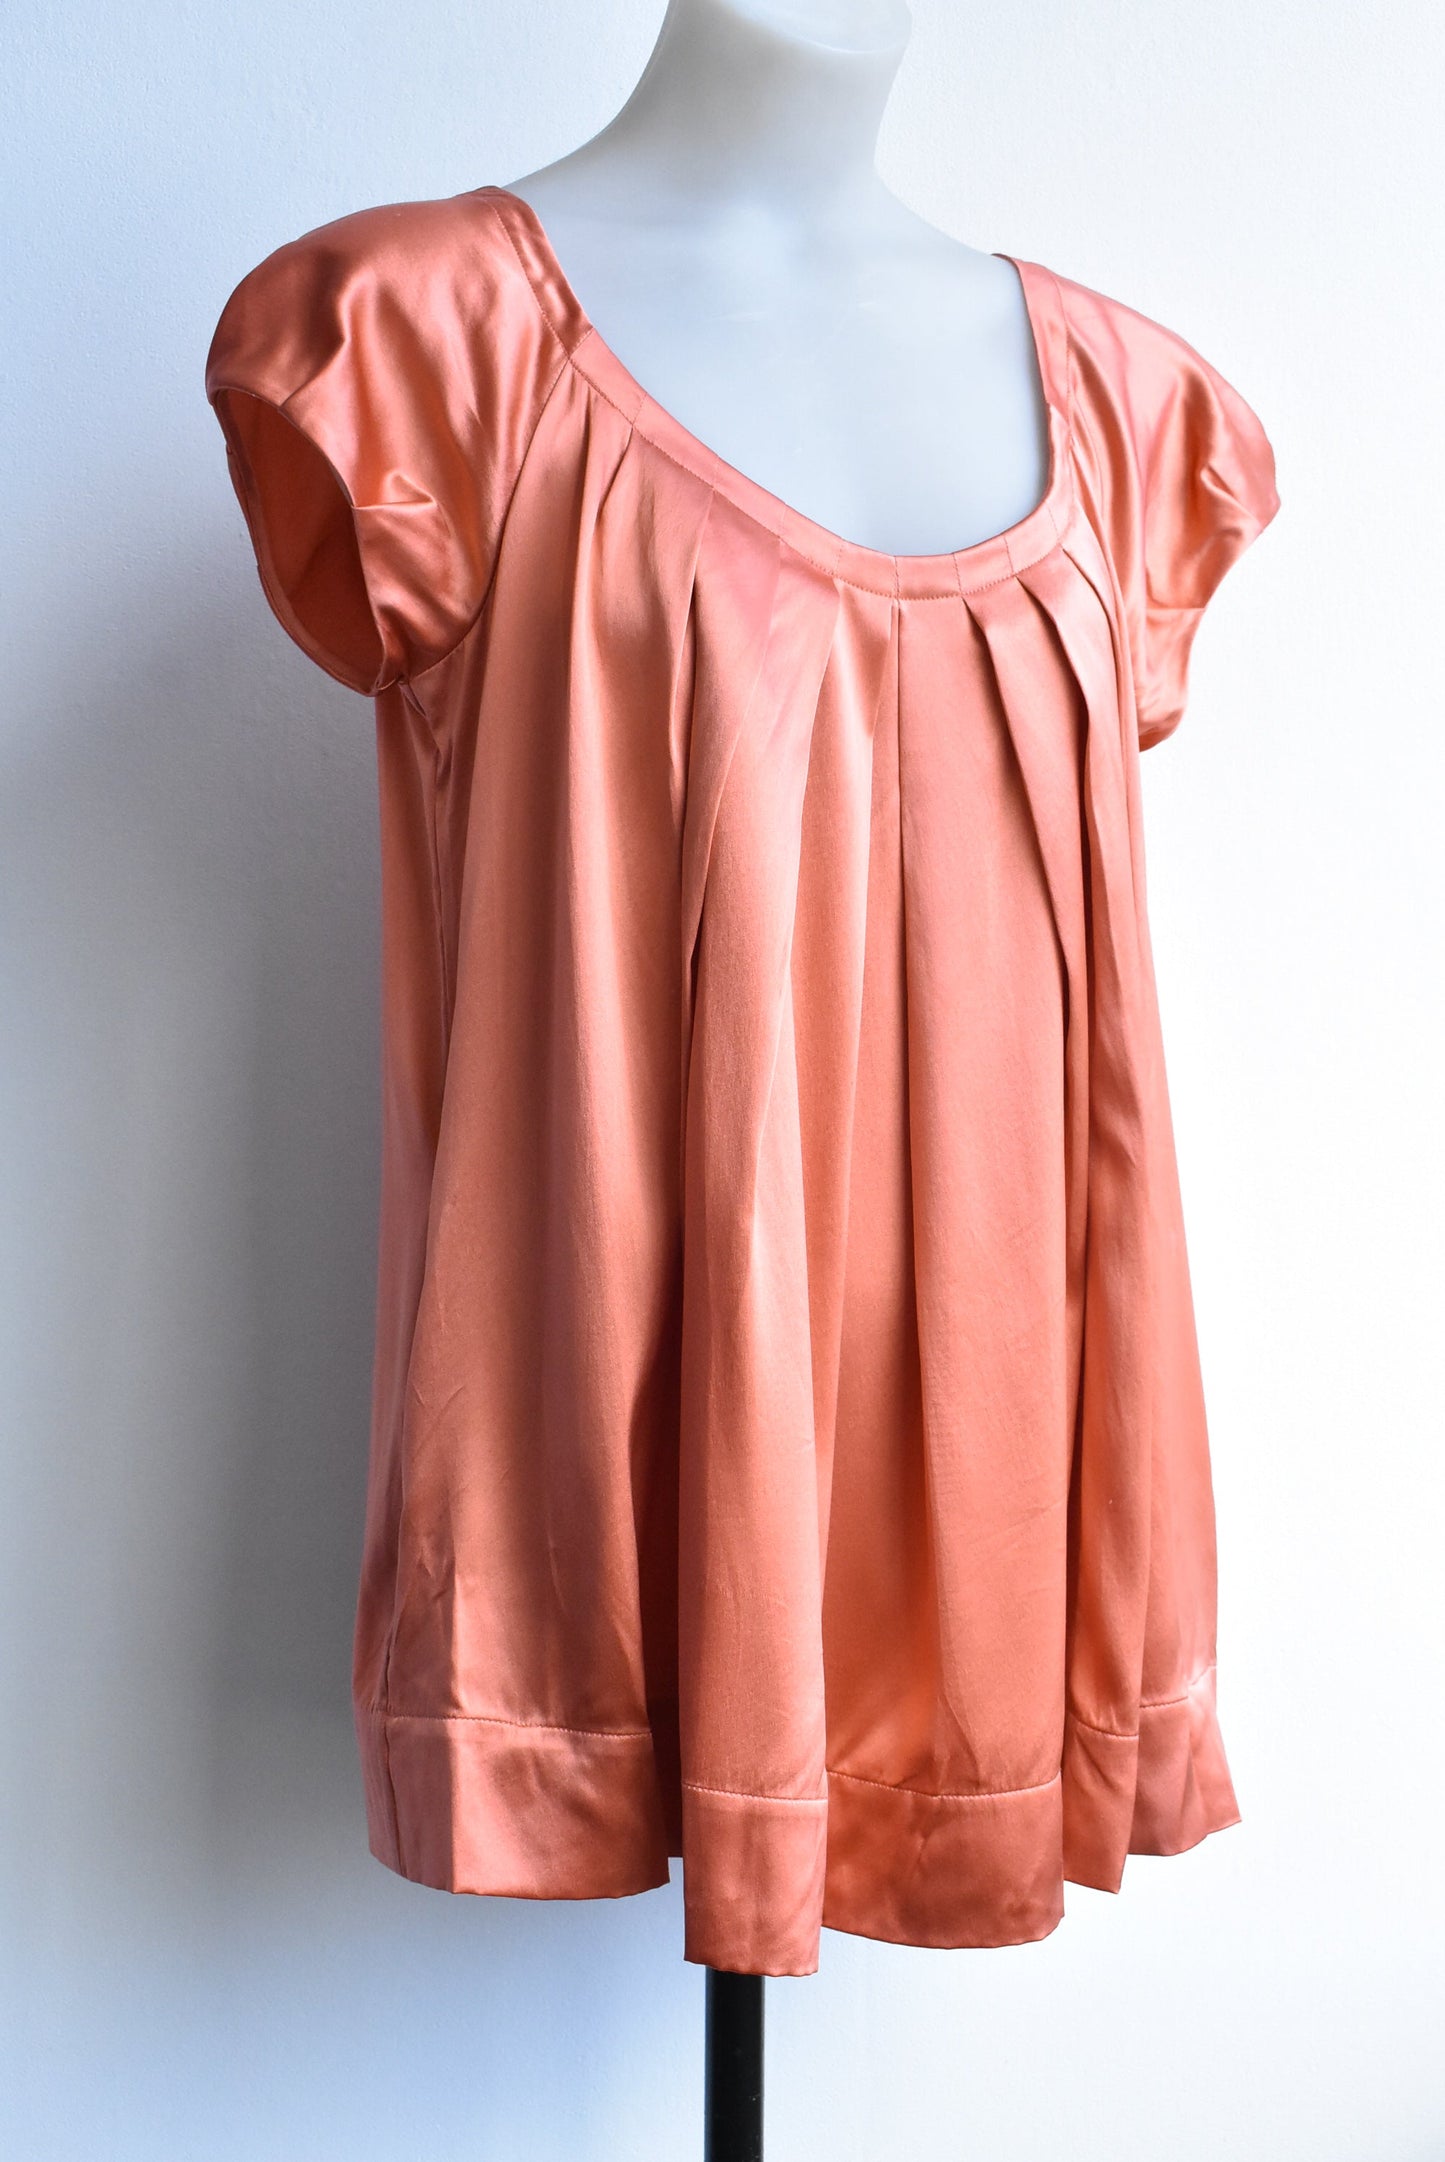 DKNY silk-blend orange pleated top with pockets, size 8